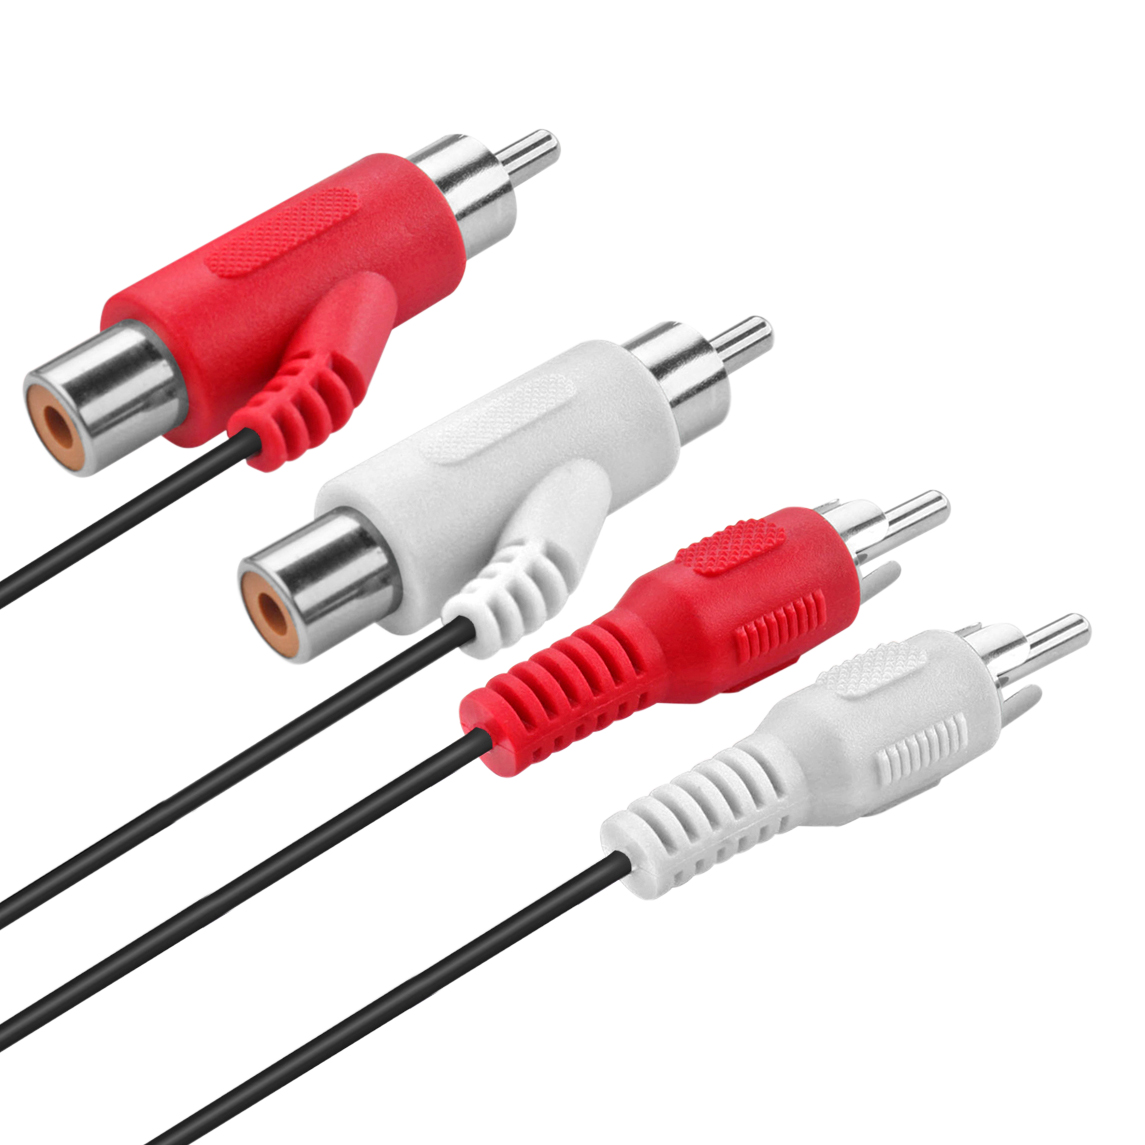 RCA Piggyback Extension Cable (6 Feet) 2RCA Audio Extender Adapter Cord Wire Coupler Male to Female Dual Red/White Connector Jack Plug Extend Video Audio 2 Channel Stereo (Right and Left) - image 3 of 4